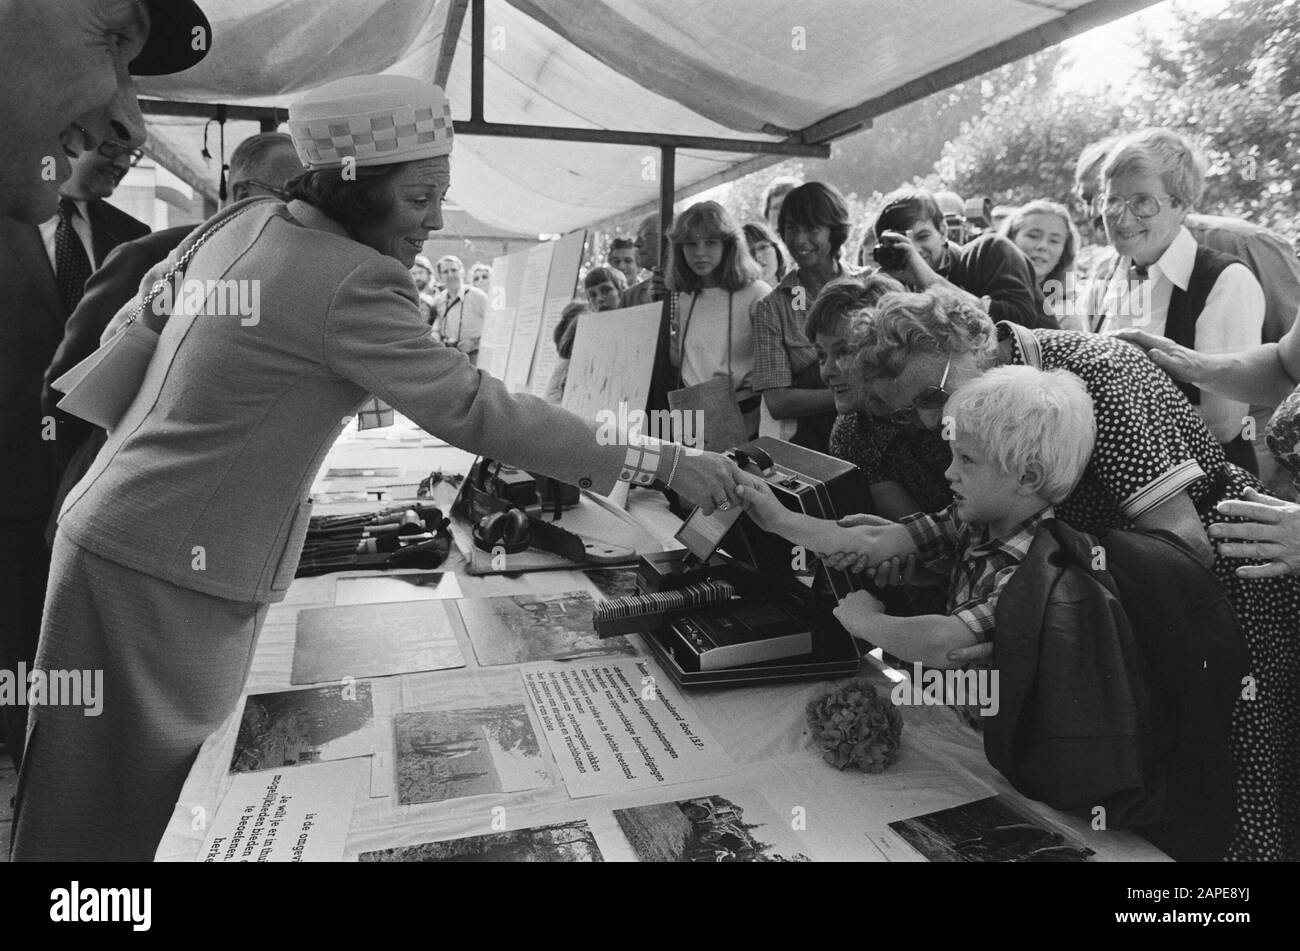 Celebration 75-year anniversary of Ver. tot Conservation of Natural Monuments in Naarden, attended by Queen Beatrix and Prince Claus Description: Beatrix comfort 6-year-old Gertjan Boonstra, who is part of a stand on his Head got Date: 20 September 1980 Location: Naarden, Noord-Holland Keywords: anniversaries, queens, environmental management, public, associations Personal name: Beatrix (queen Netherlands), Boonstra, Gertjan Stock Photo